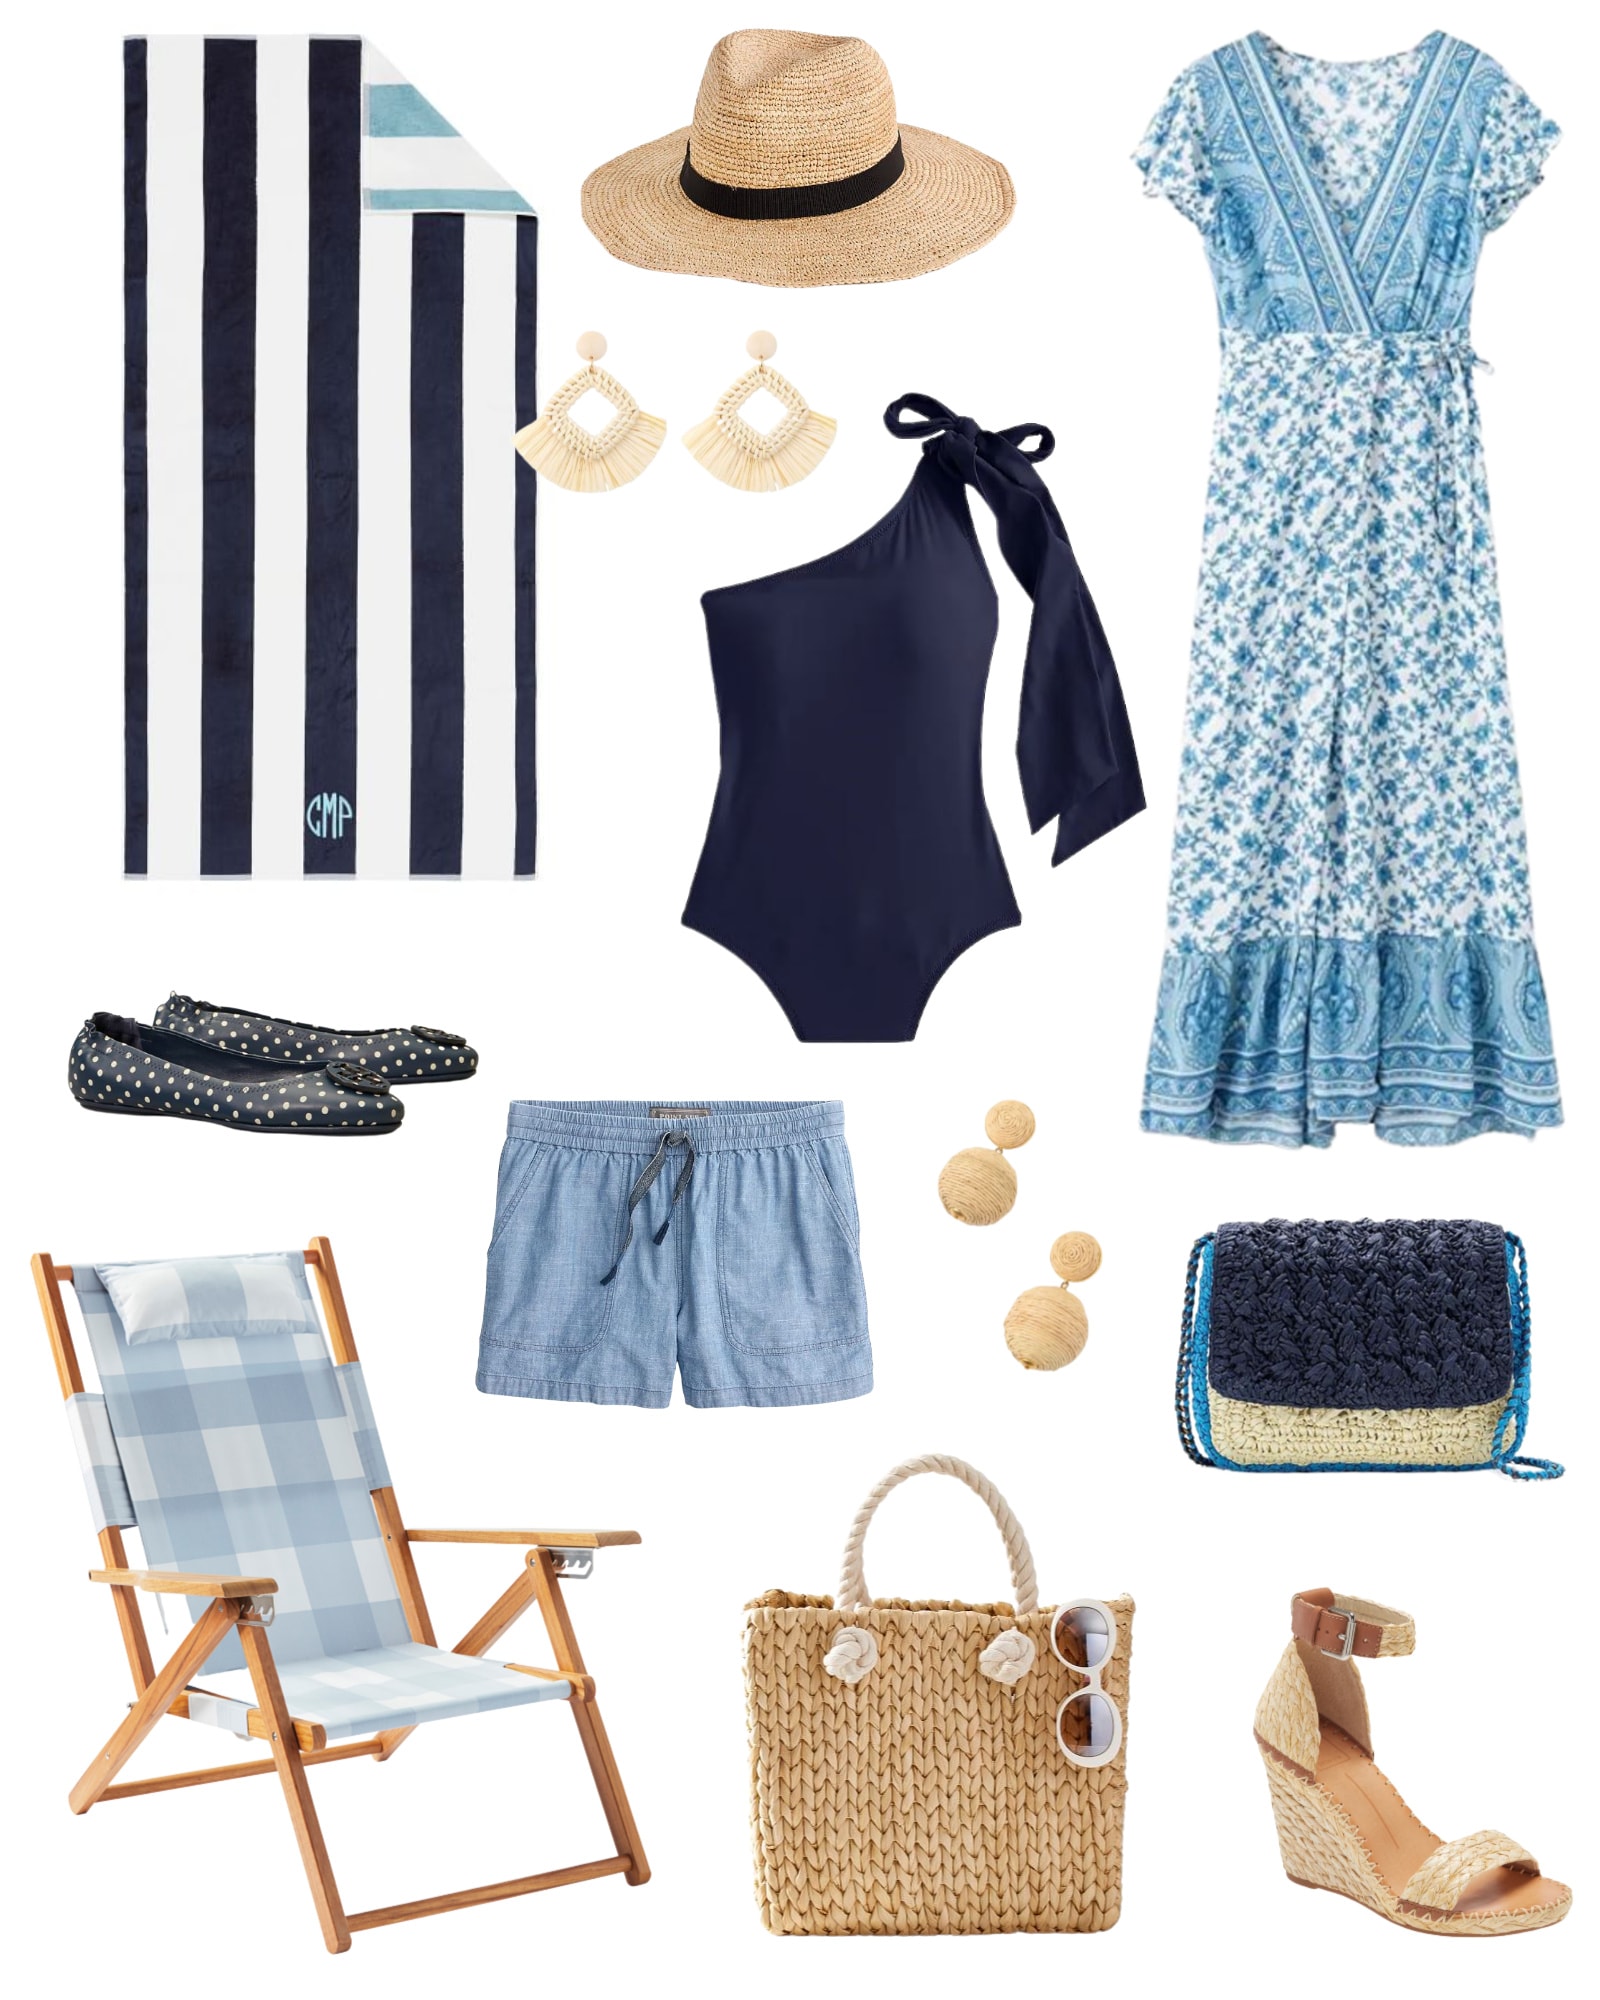 Summer Outfit Ideas & Warm Weather Favorites - Life On Virginia Street